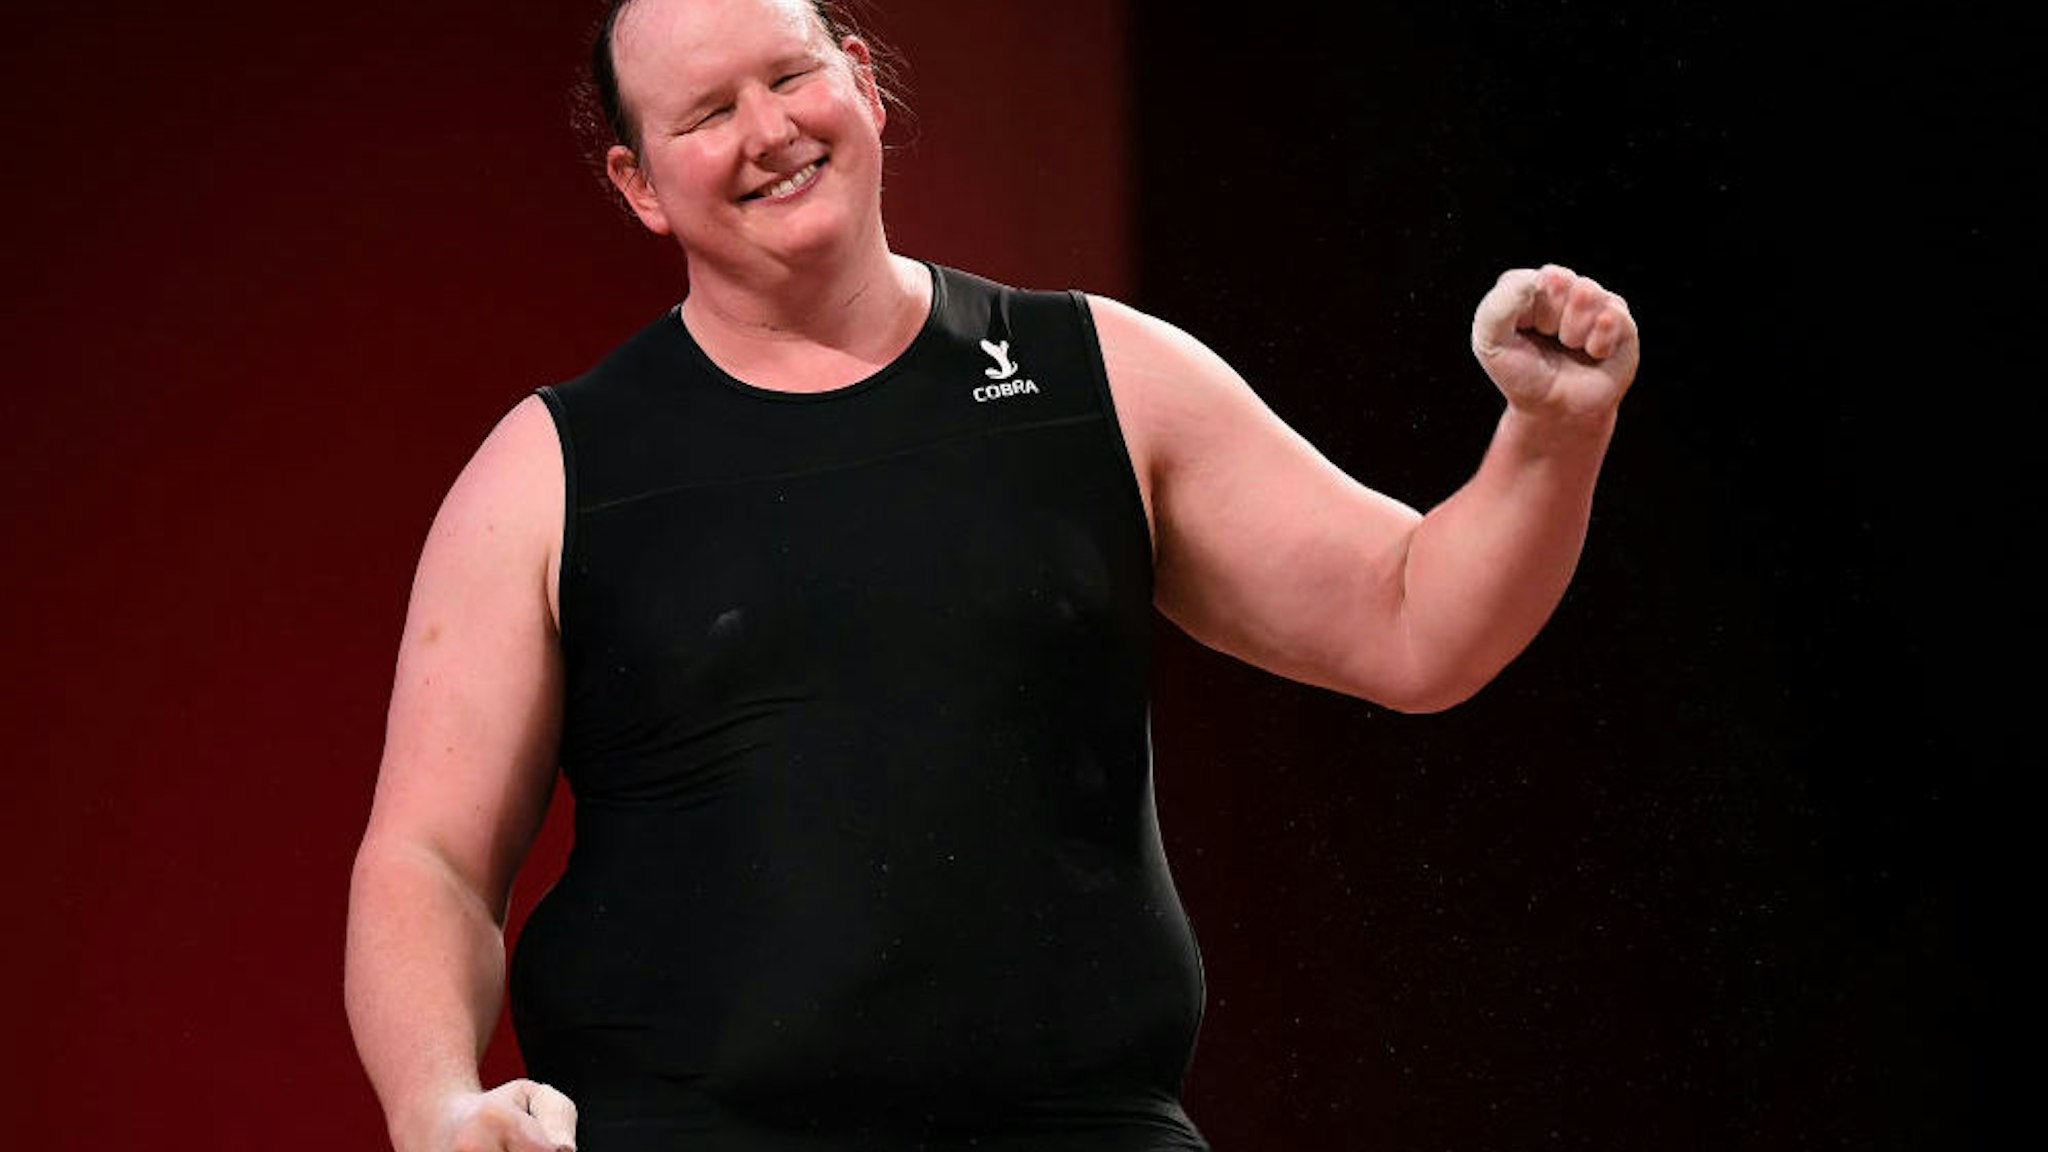 New Zealands Laurel Hubbard, the first transgender Olympian, smiles to the small crowd after failing to advance in the womens 87kg weightlifting final at the 2020 Tokyo Olympics.